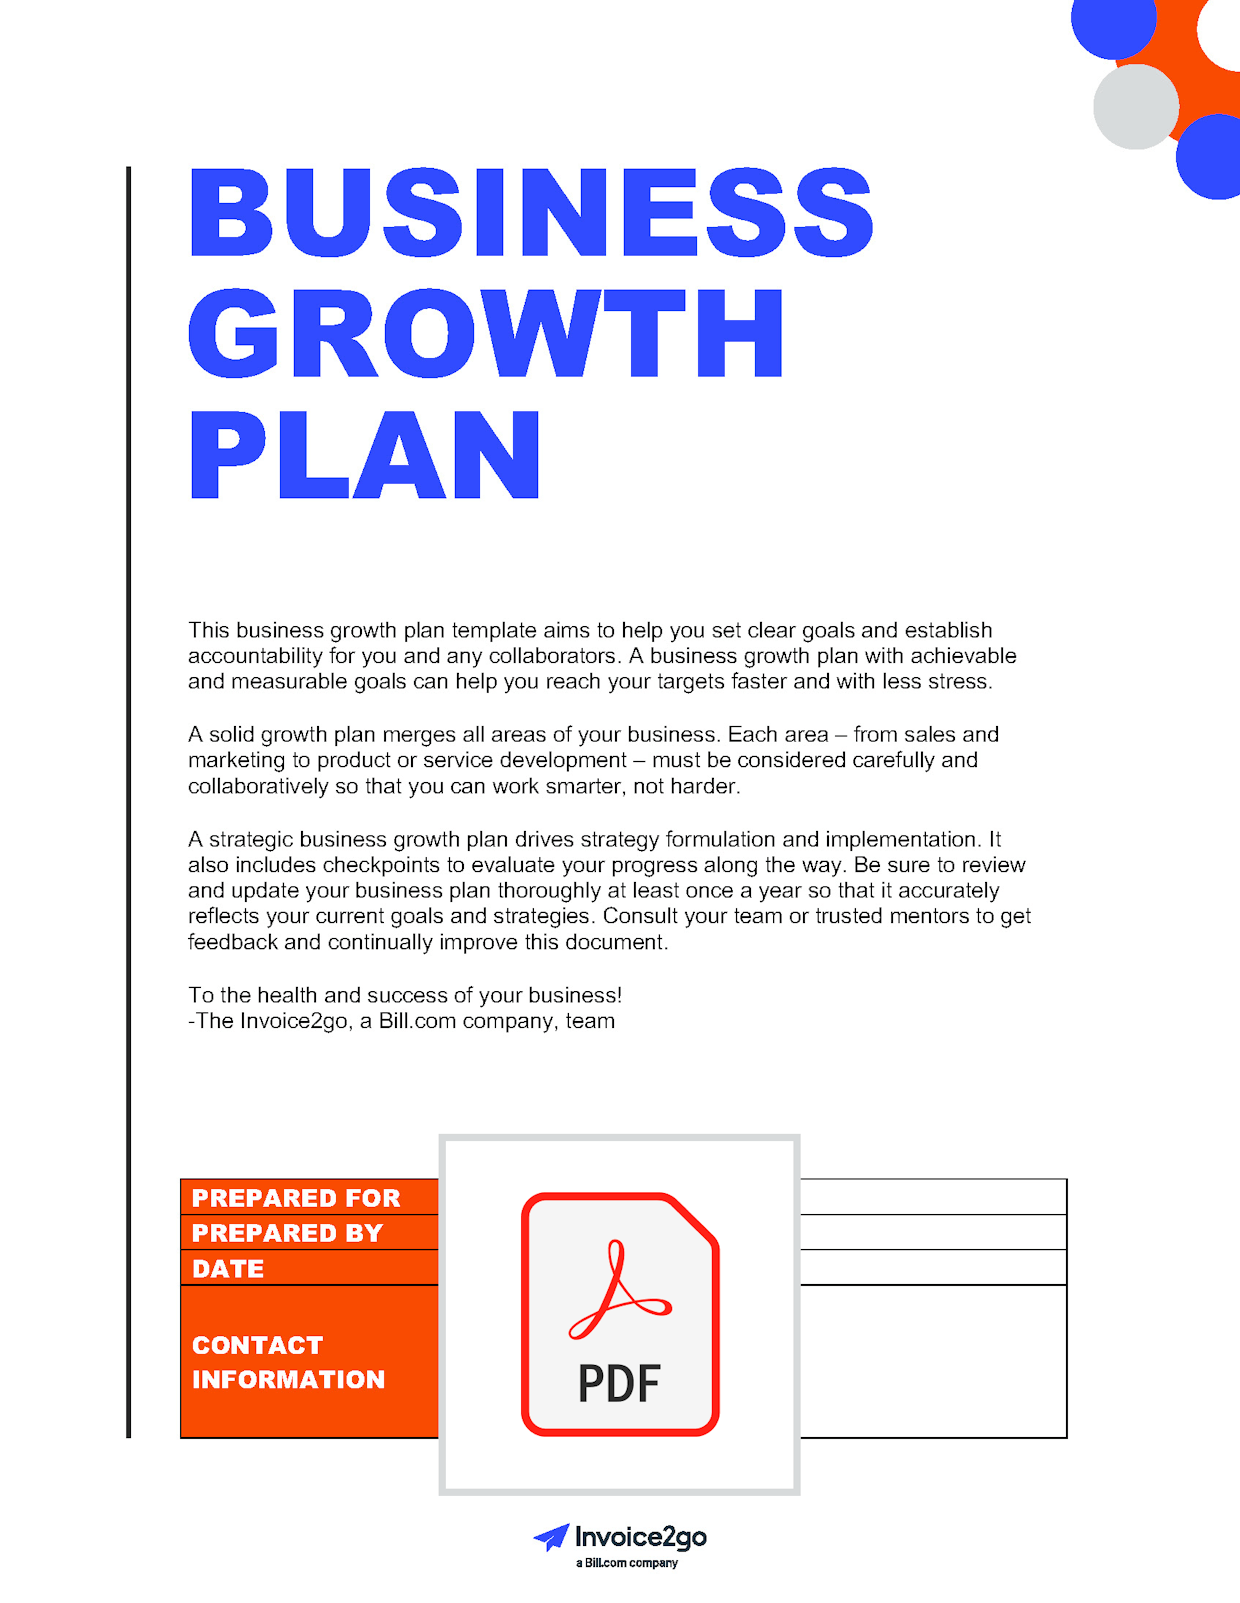 Downloadable Growth Business Plan Template Invoice2go